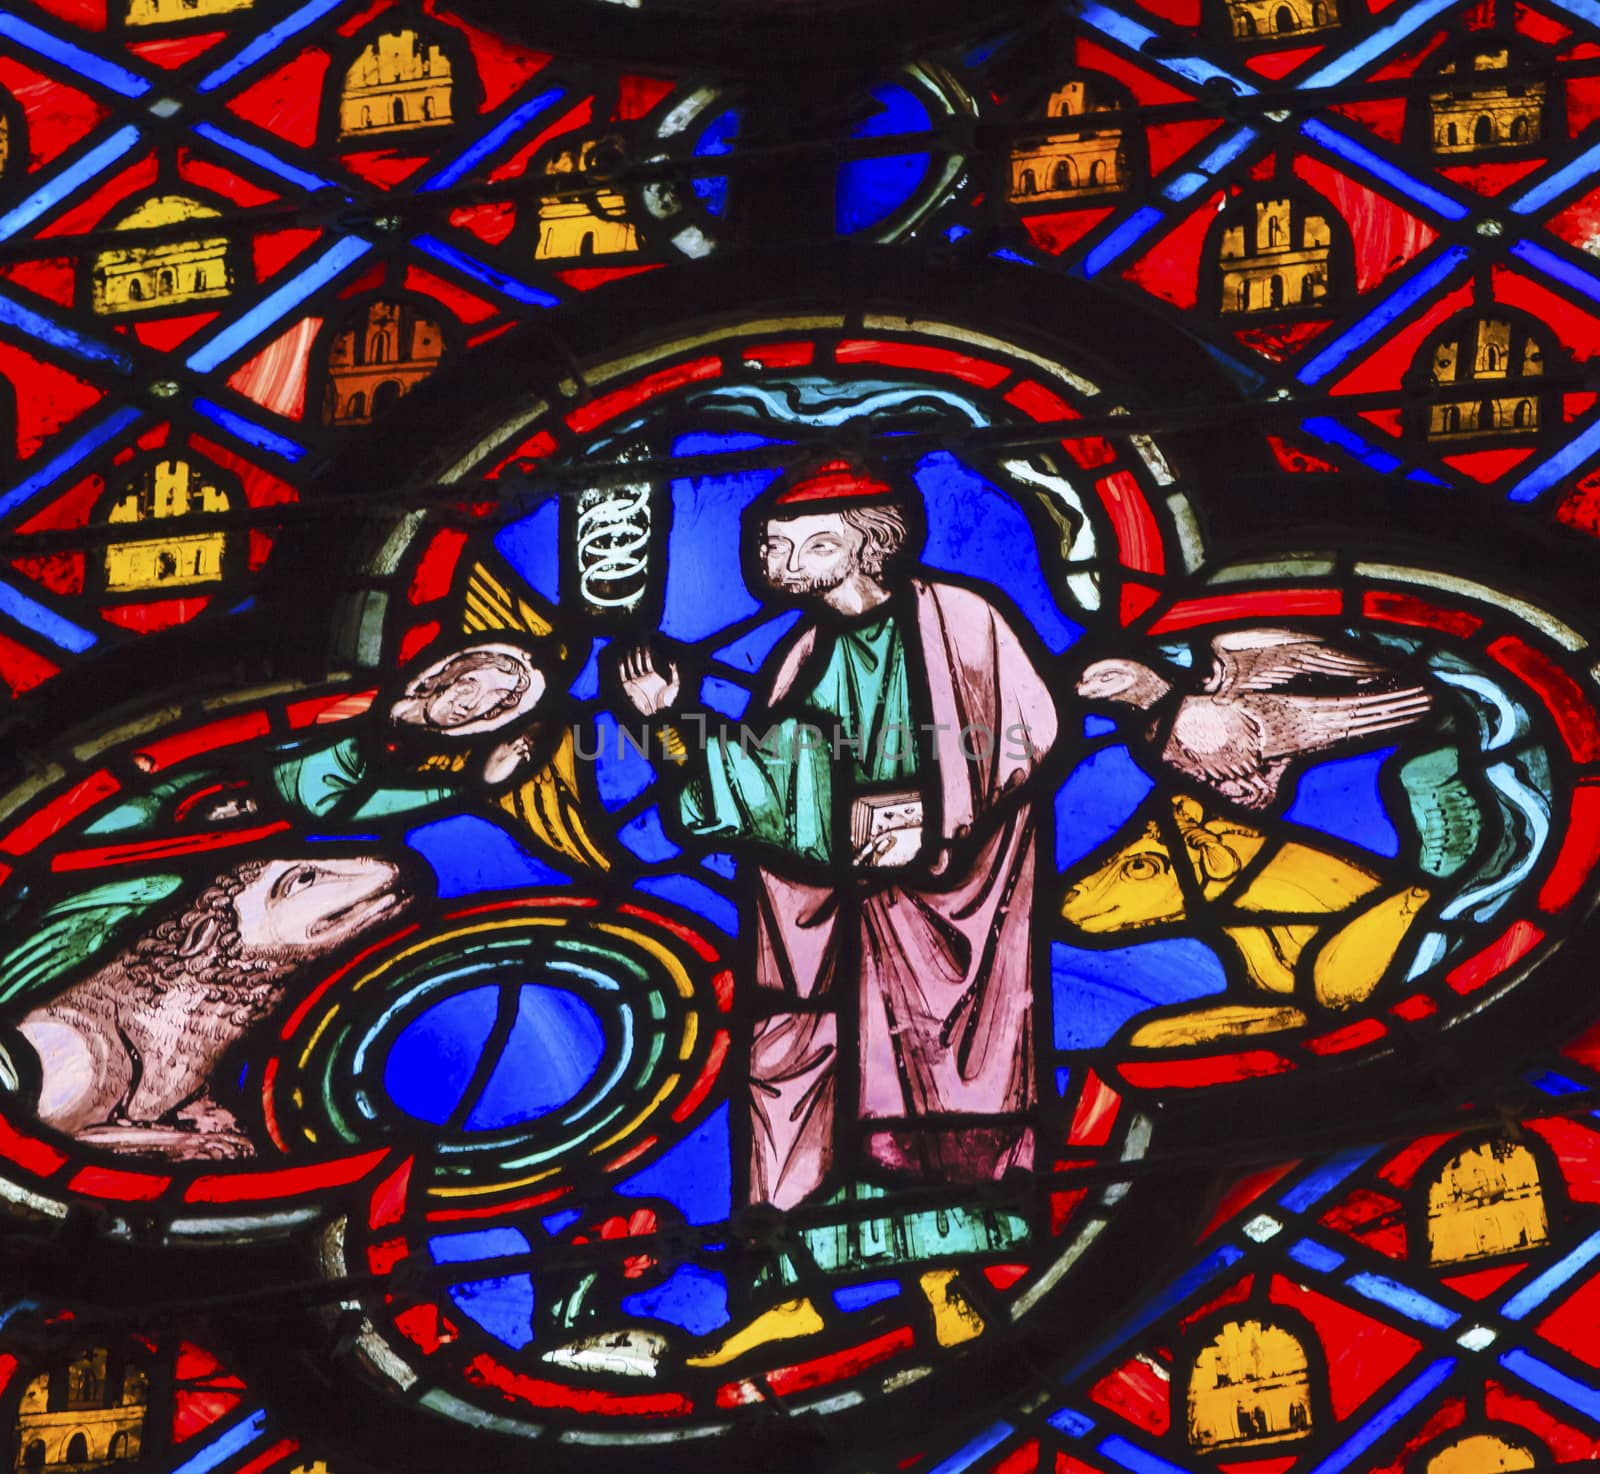 Saint Francis of Assisi Animals Stained Glass Saint Chapelle Paris France.  Francis was 12th Century Century, who worked with animals and the poor.  Saint King Louis 9th created Sainte Chapelle in 1248 to house Christian relics, including Christ's Crown of Thorns.  Stained Glass created in the 13th Century and shows various biblical stories along with stories from 1200s.